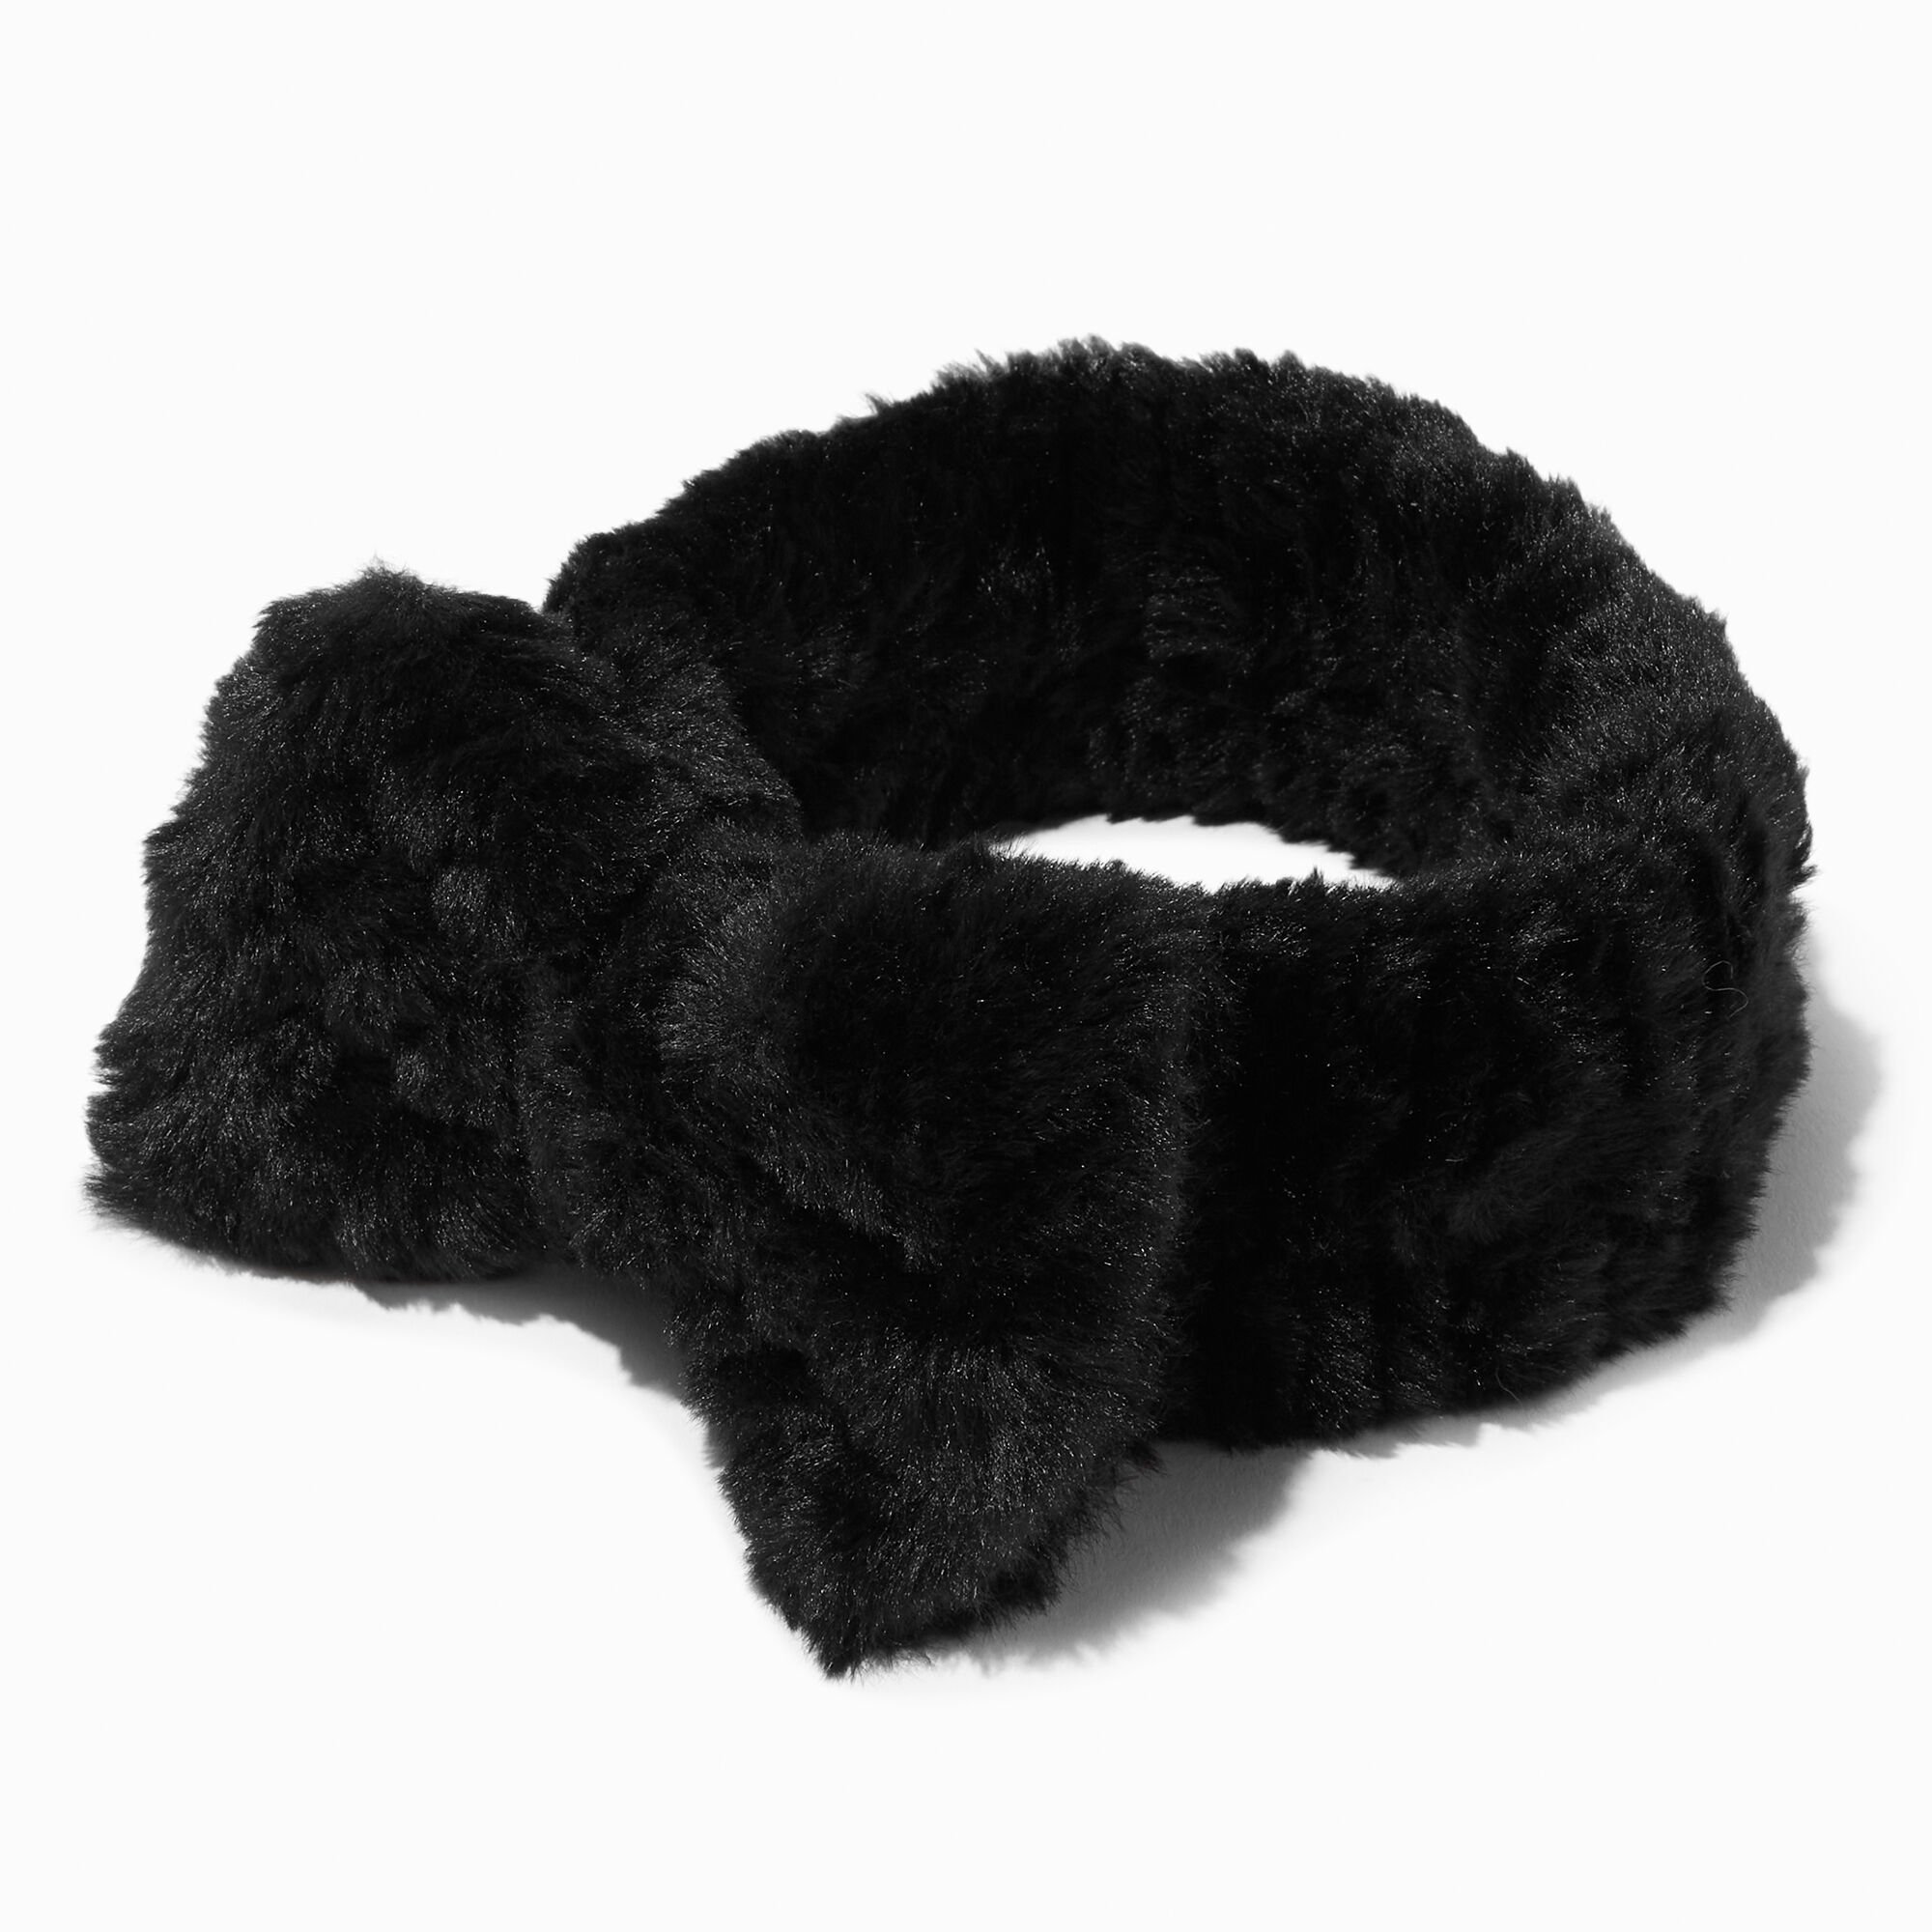 View Claires Furry Makeup Bow Headwrap Black information